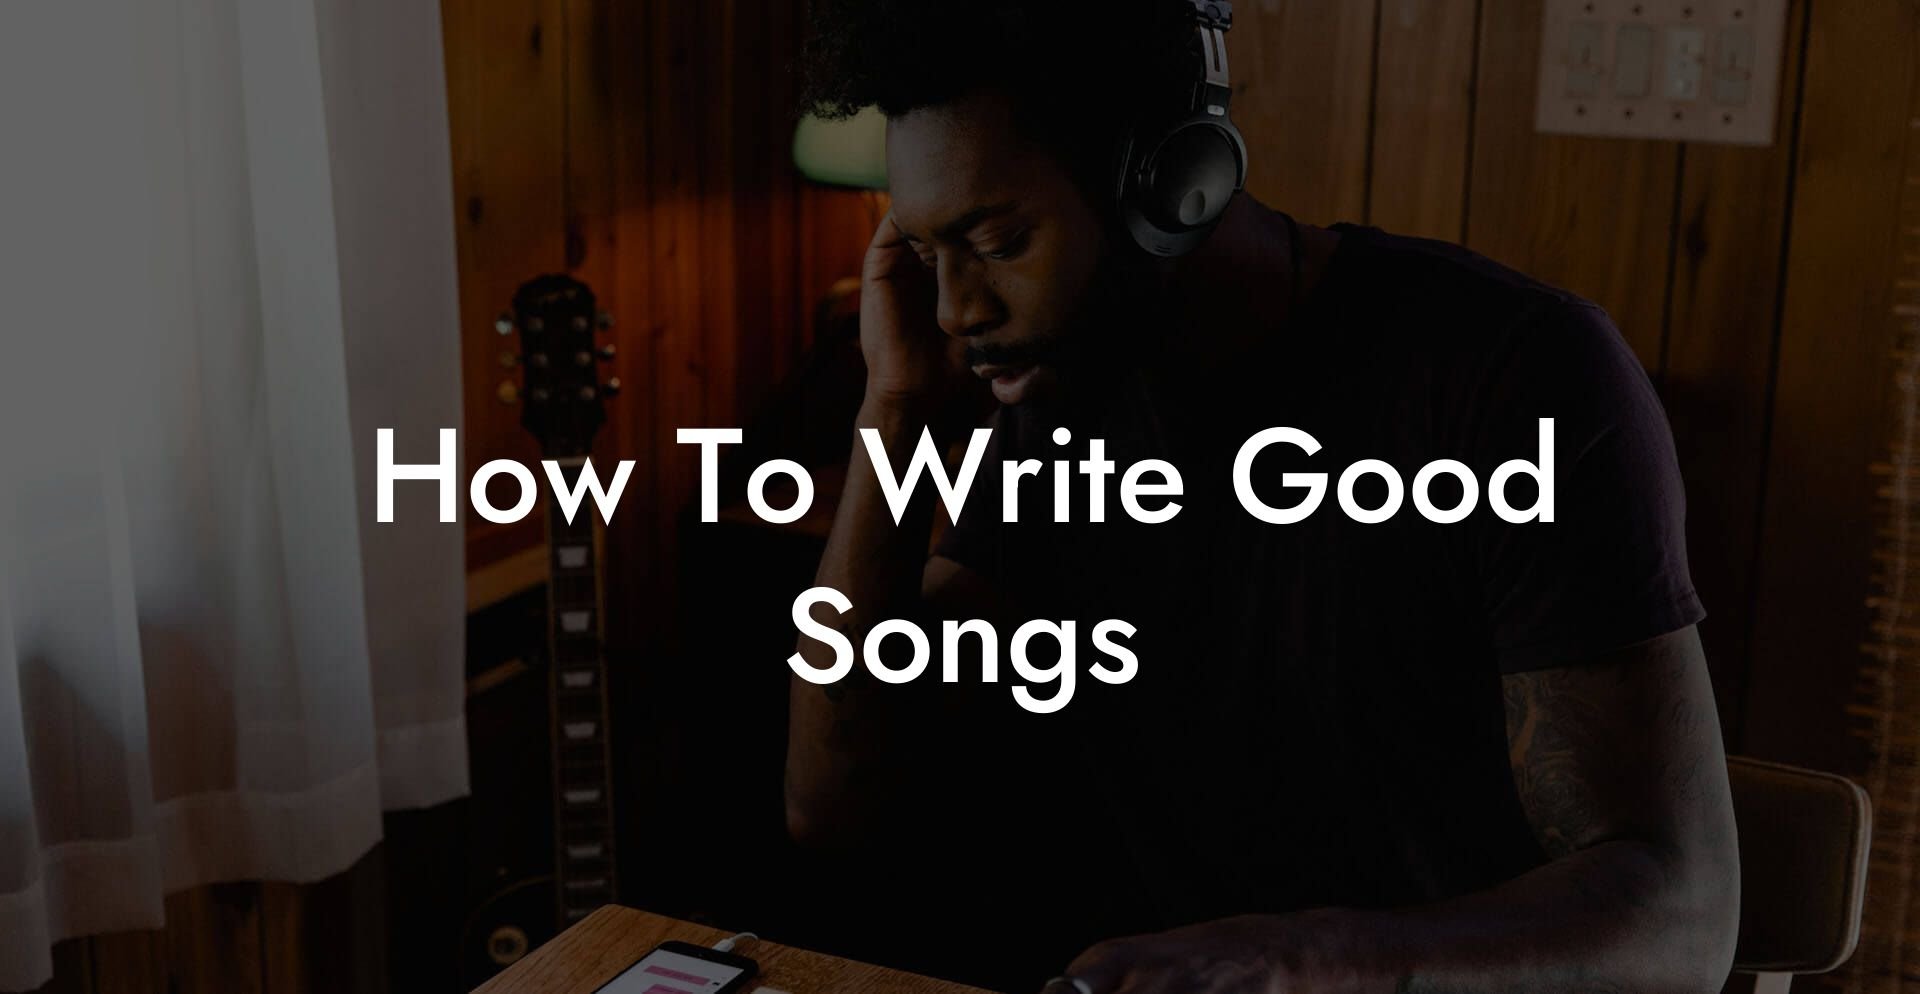 how to write good songs lyric assistant